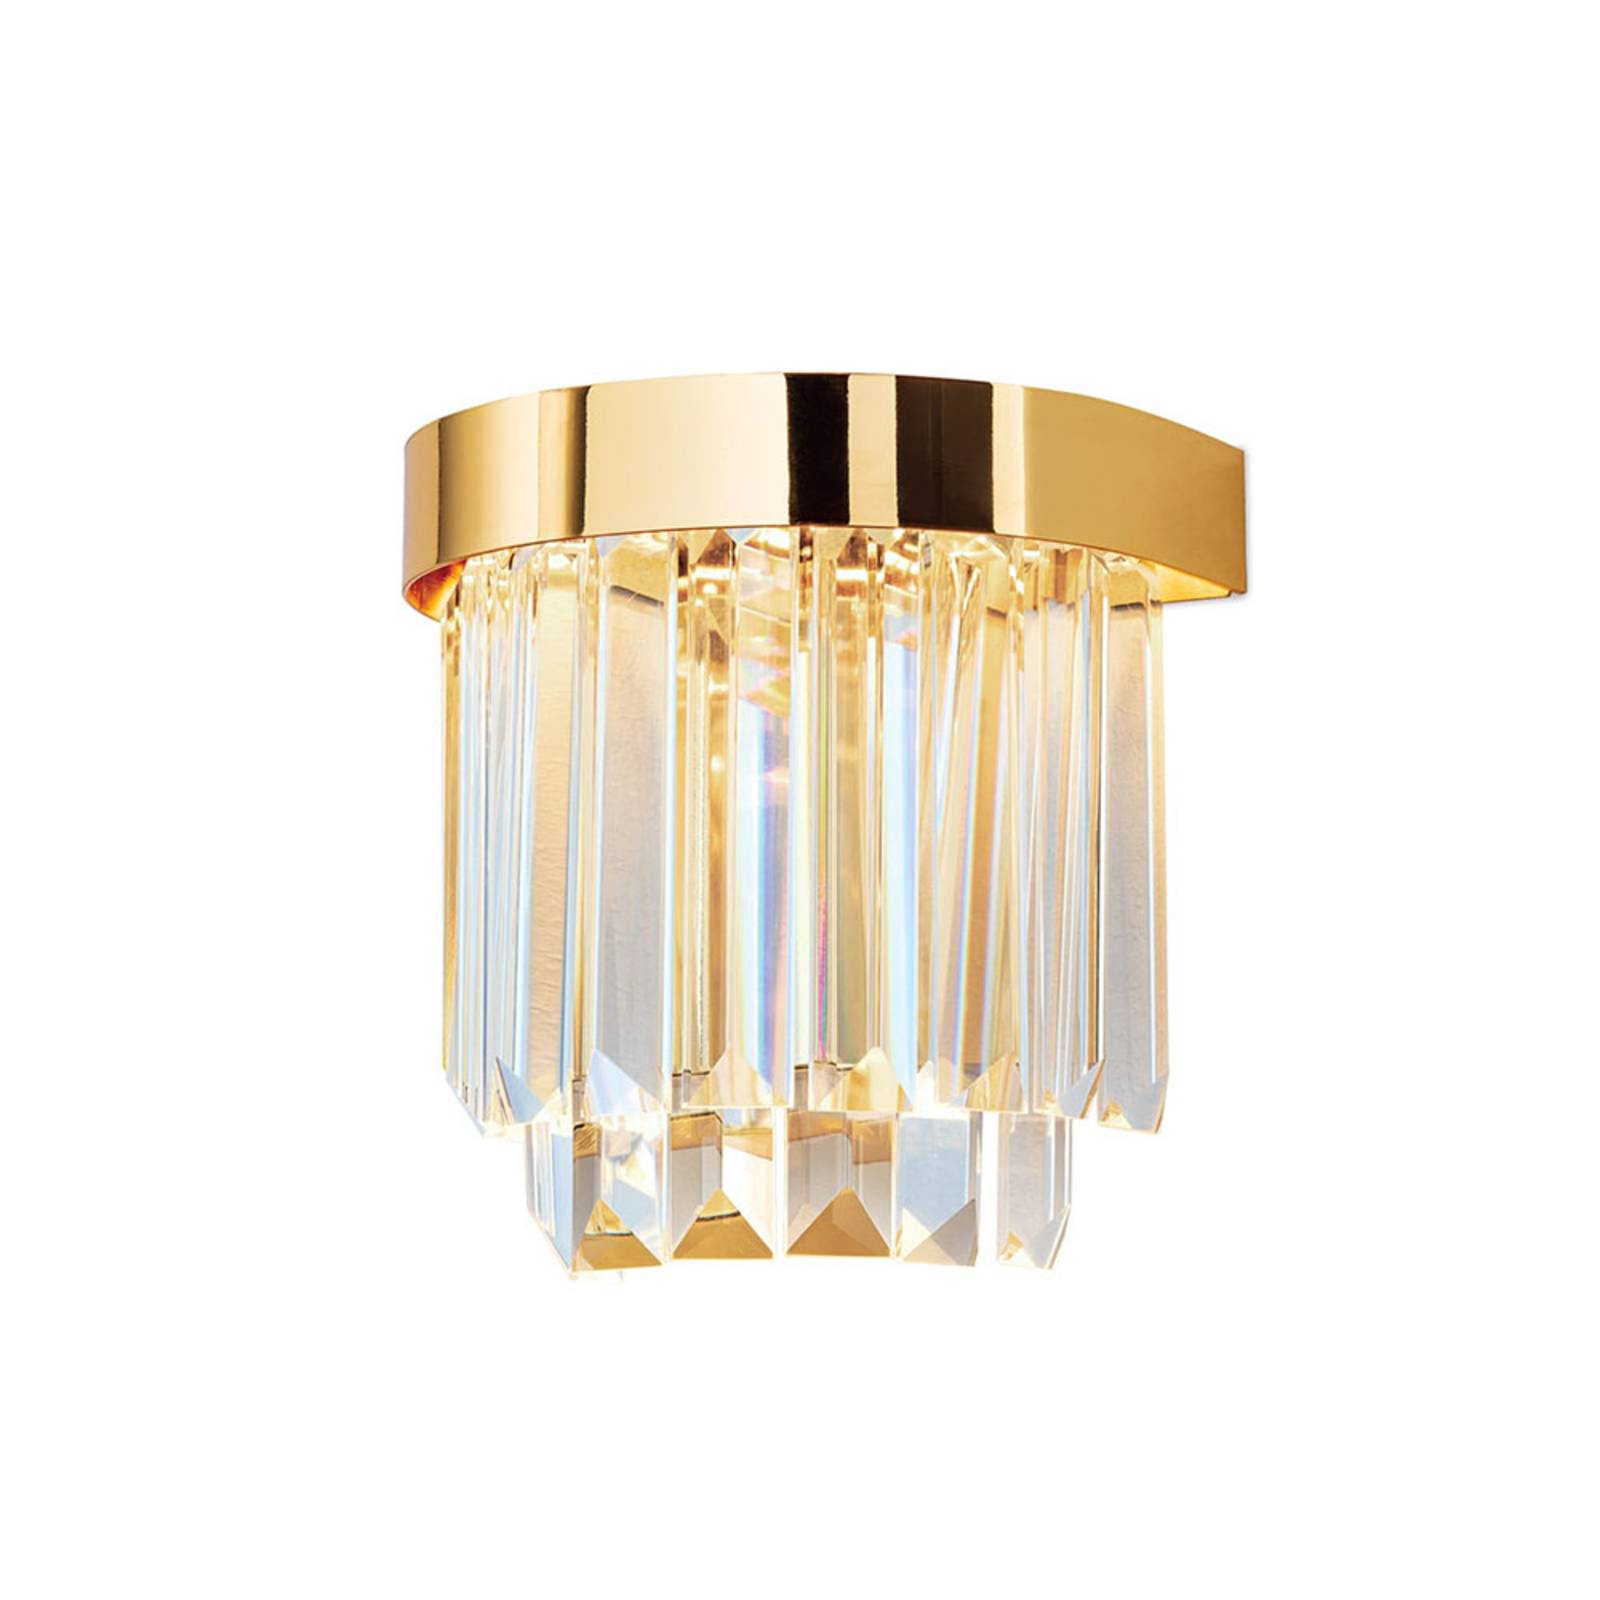 Orion LED-Wandleuchte Prism mit Up- and Downlight, gold